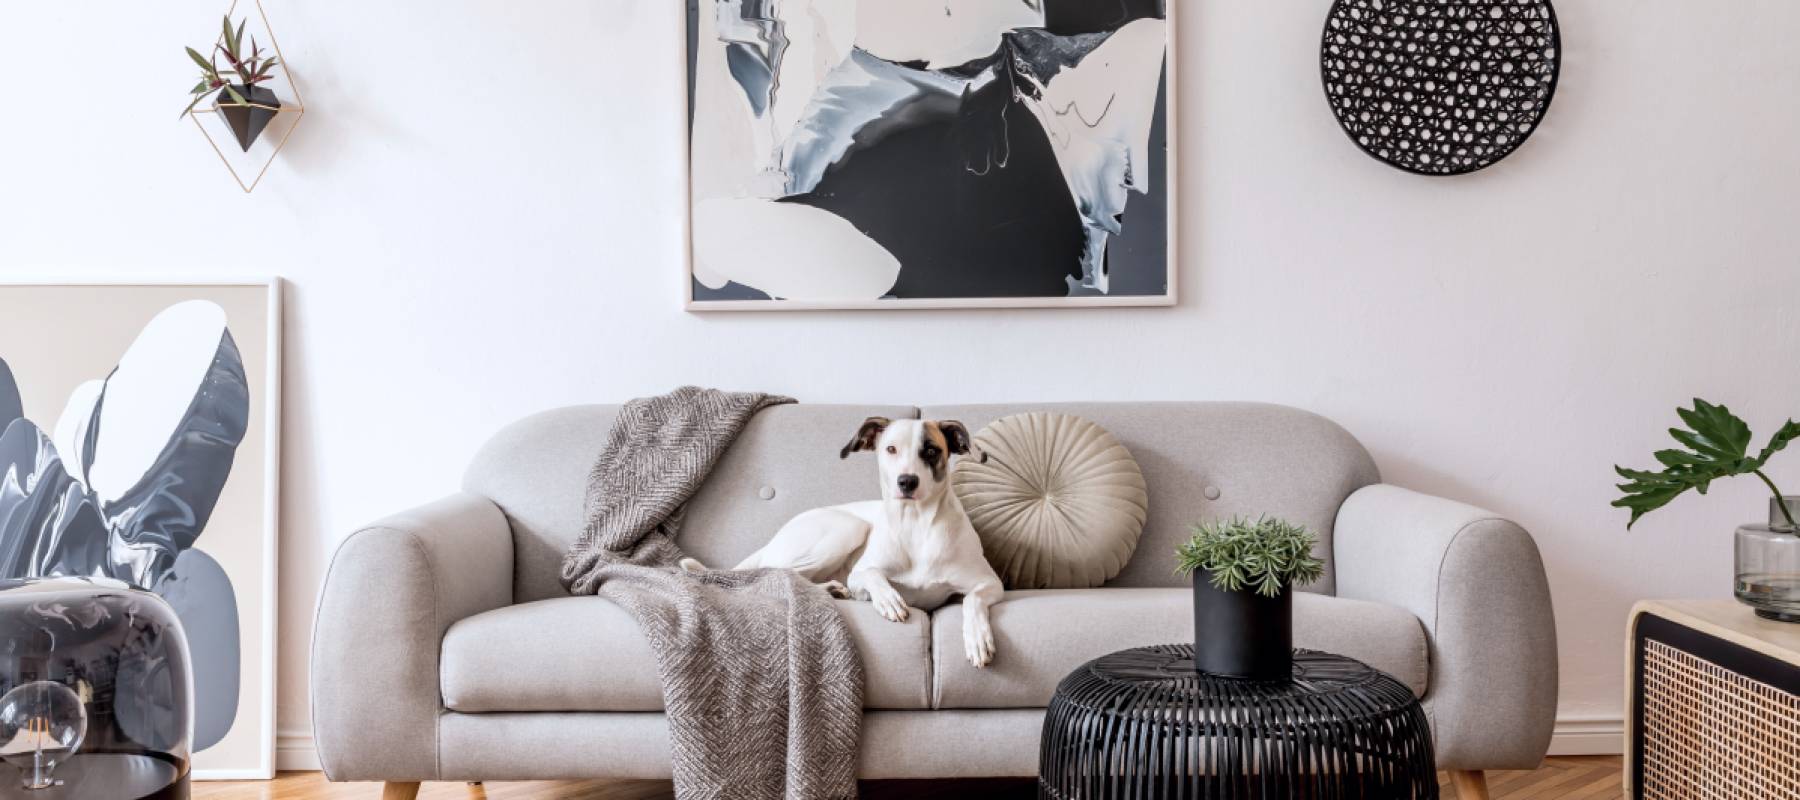 Dog sitting on couch in apartment that is well decorated